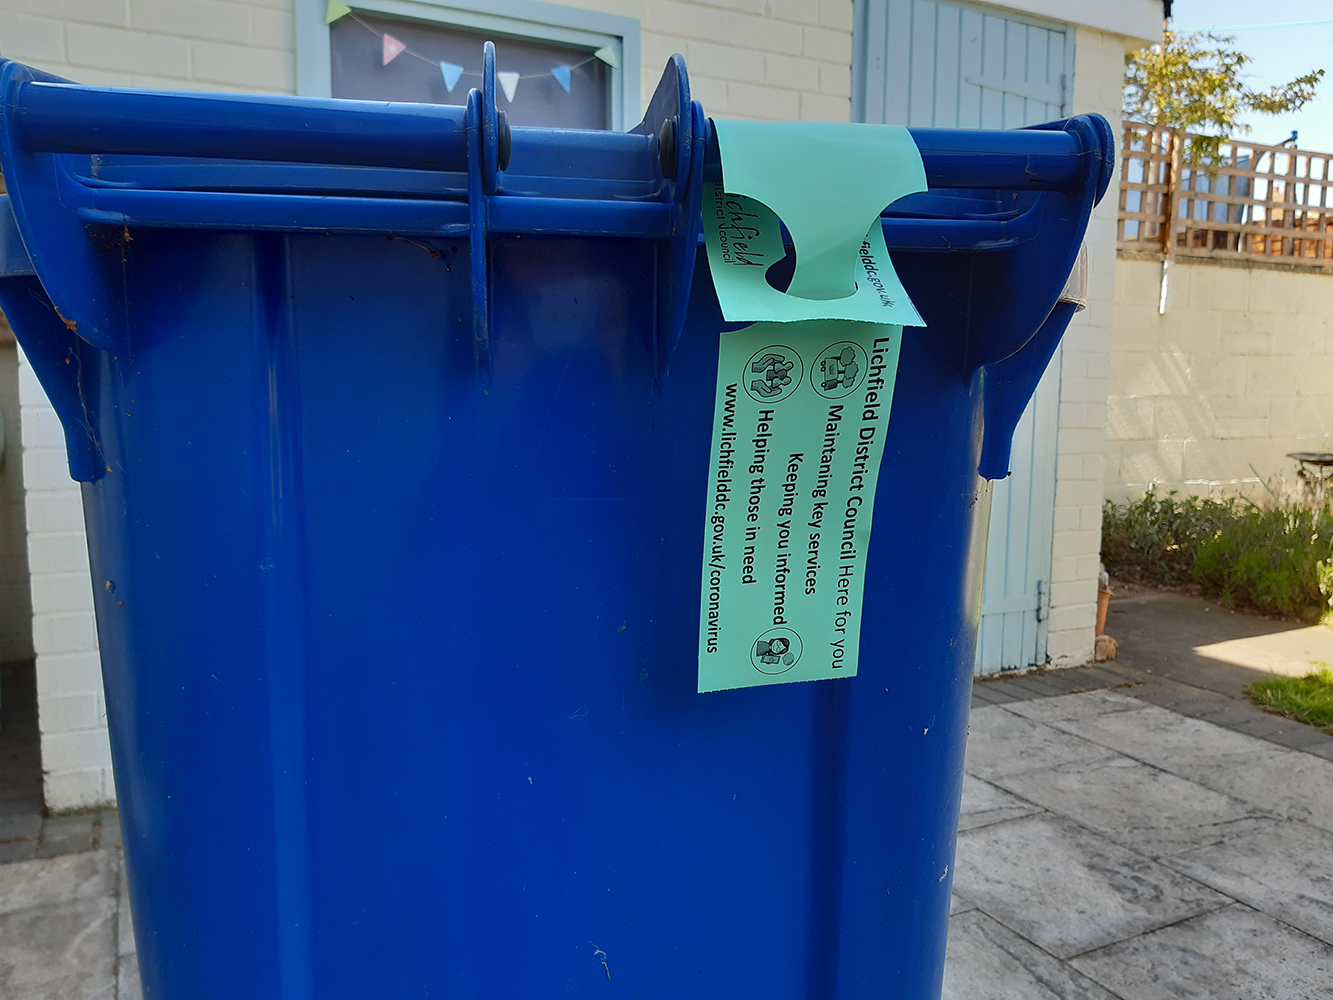 Green bin tags are being placed on waste bins across the district when bins are emptied.